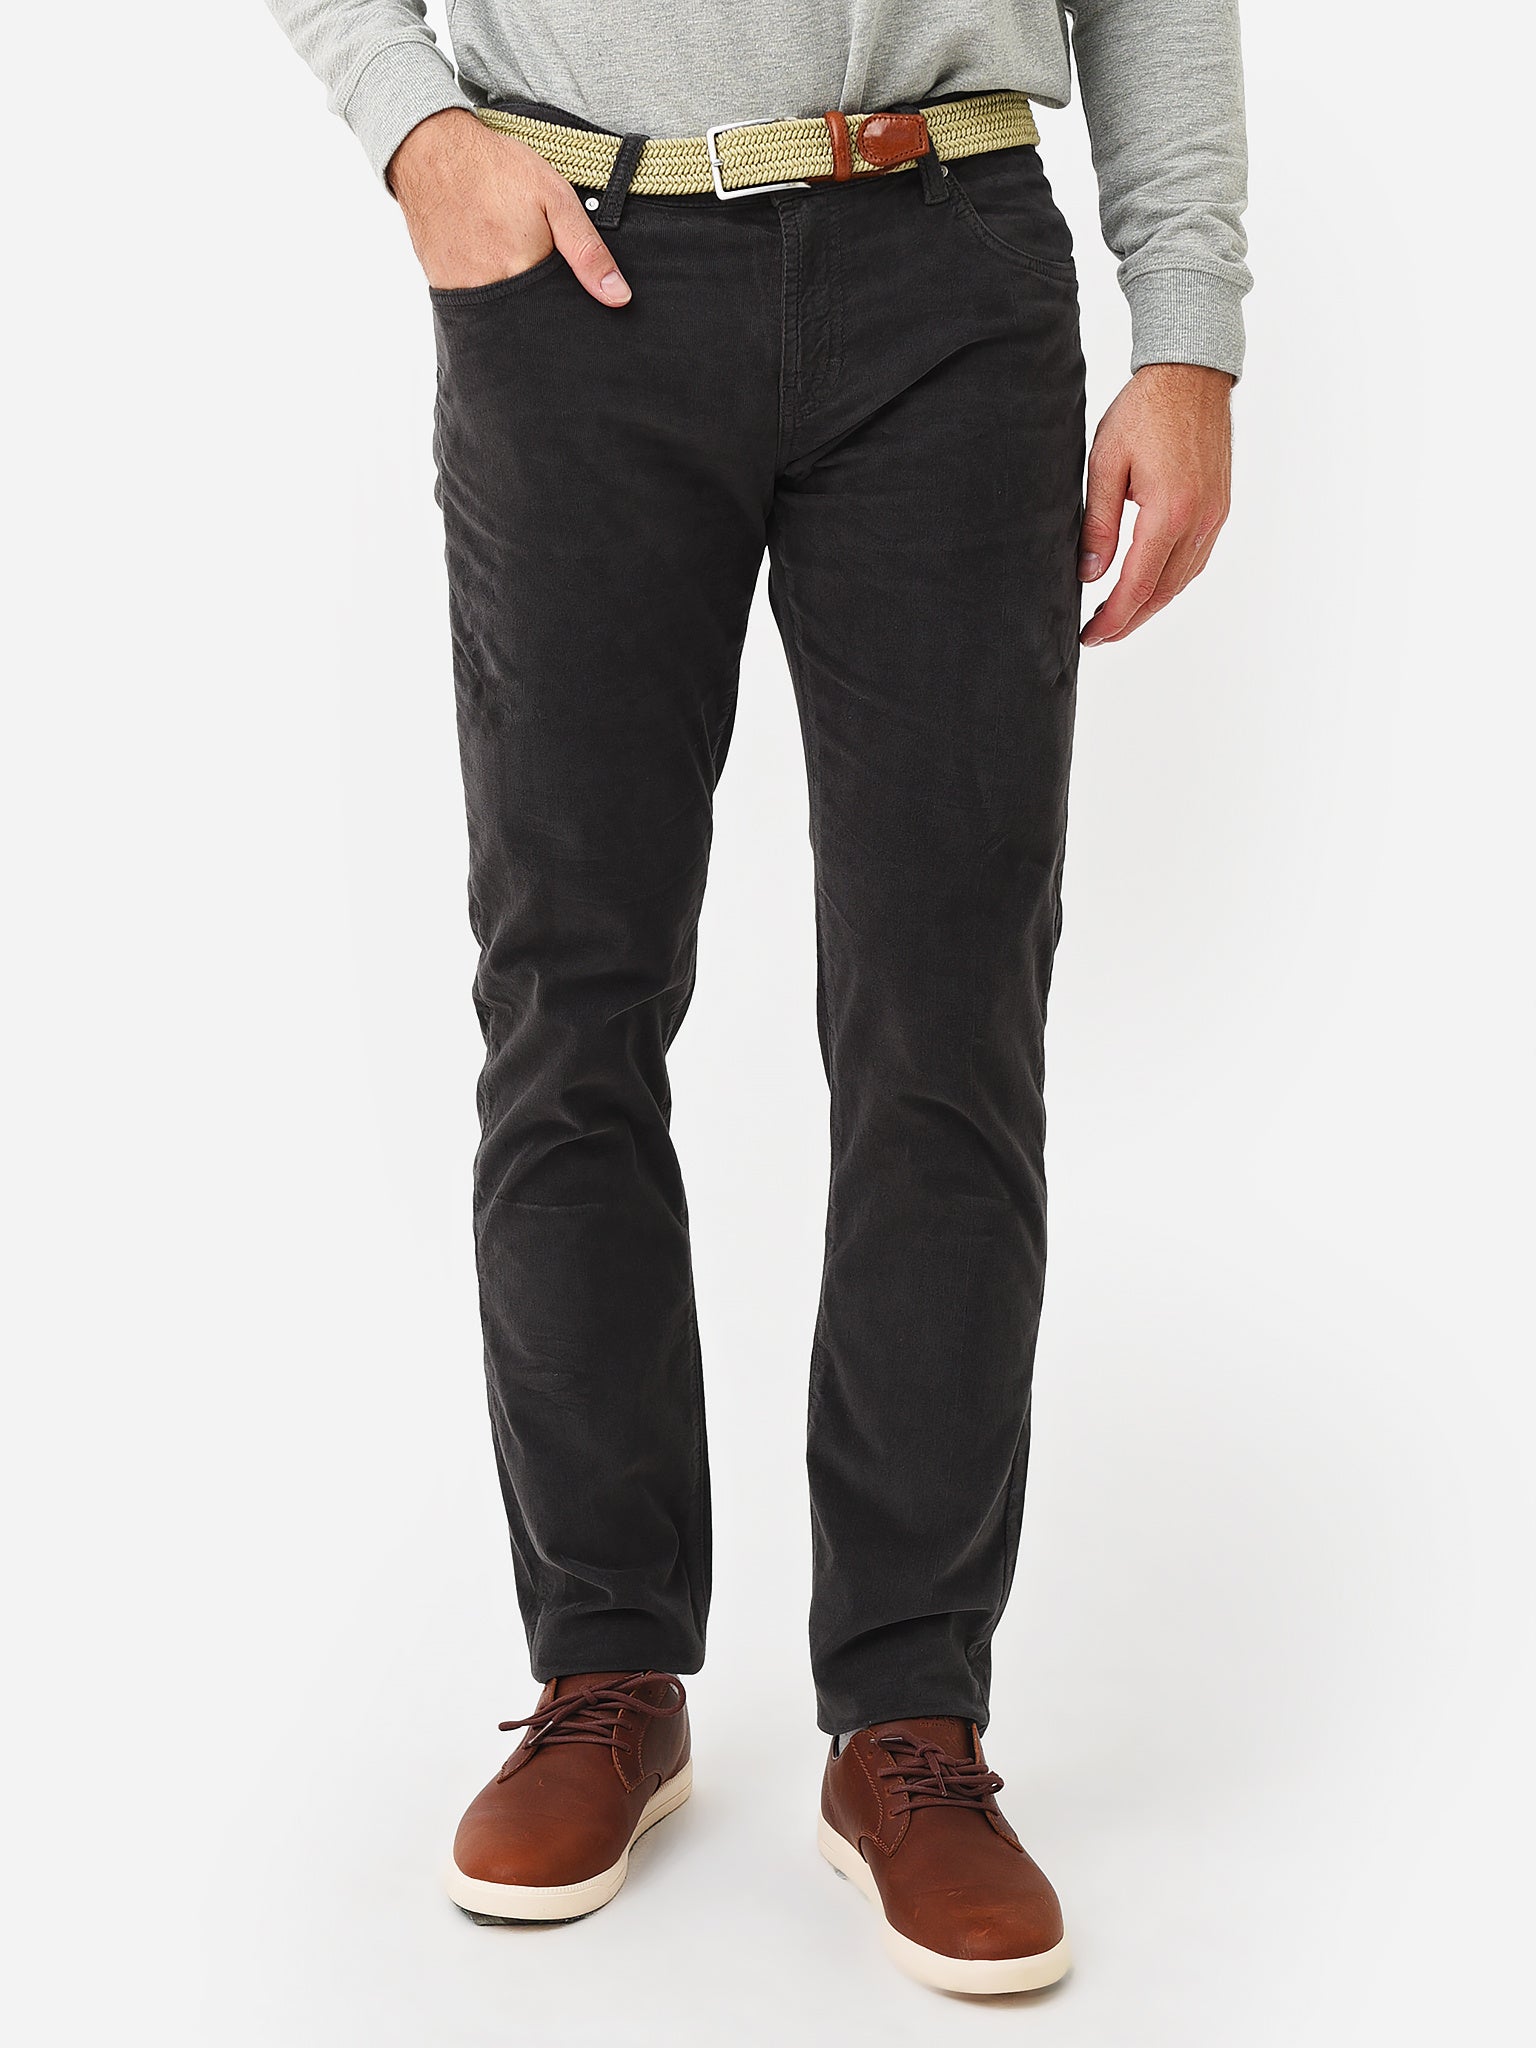 Buy Stone Slim Soft Touch 5 Pocket Jean Style Trousers from the Next UK  online shop